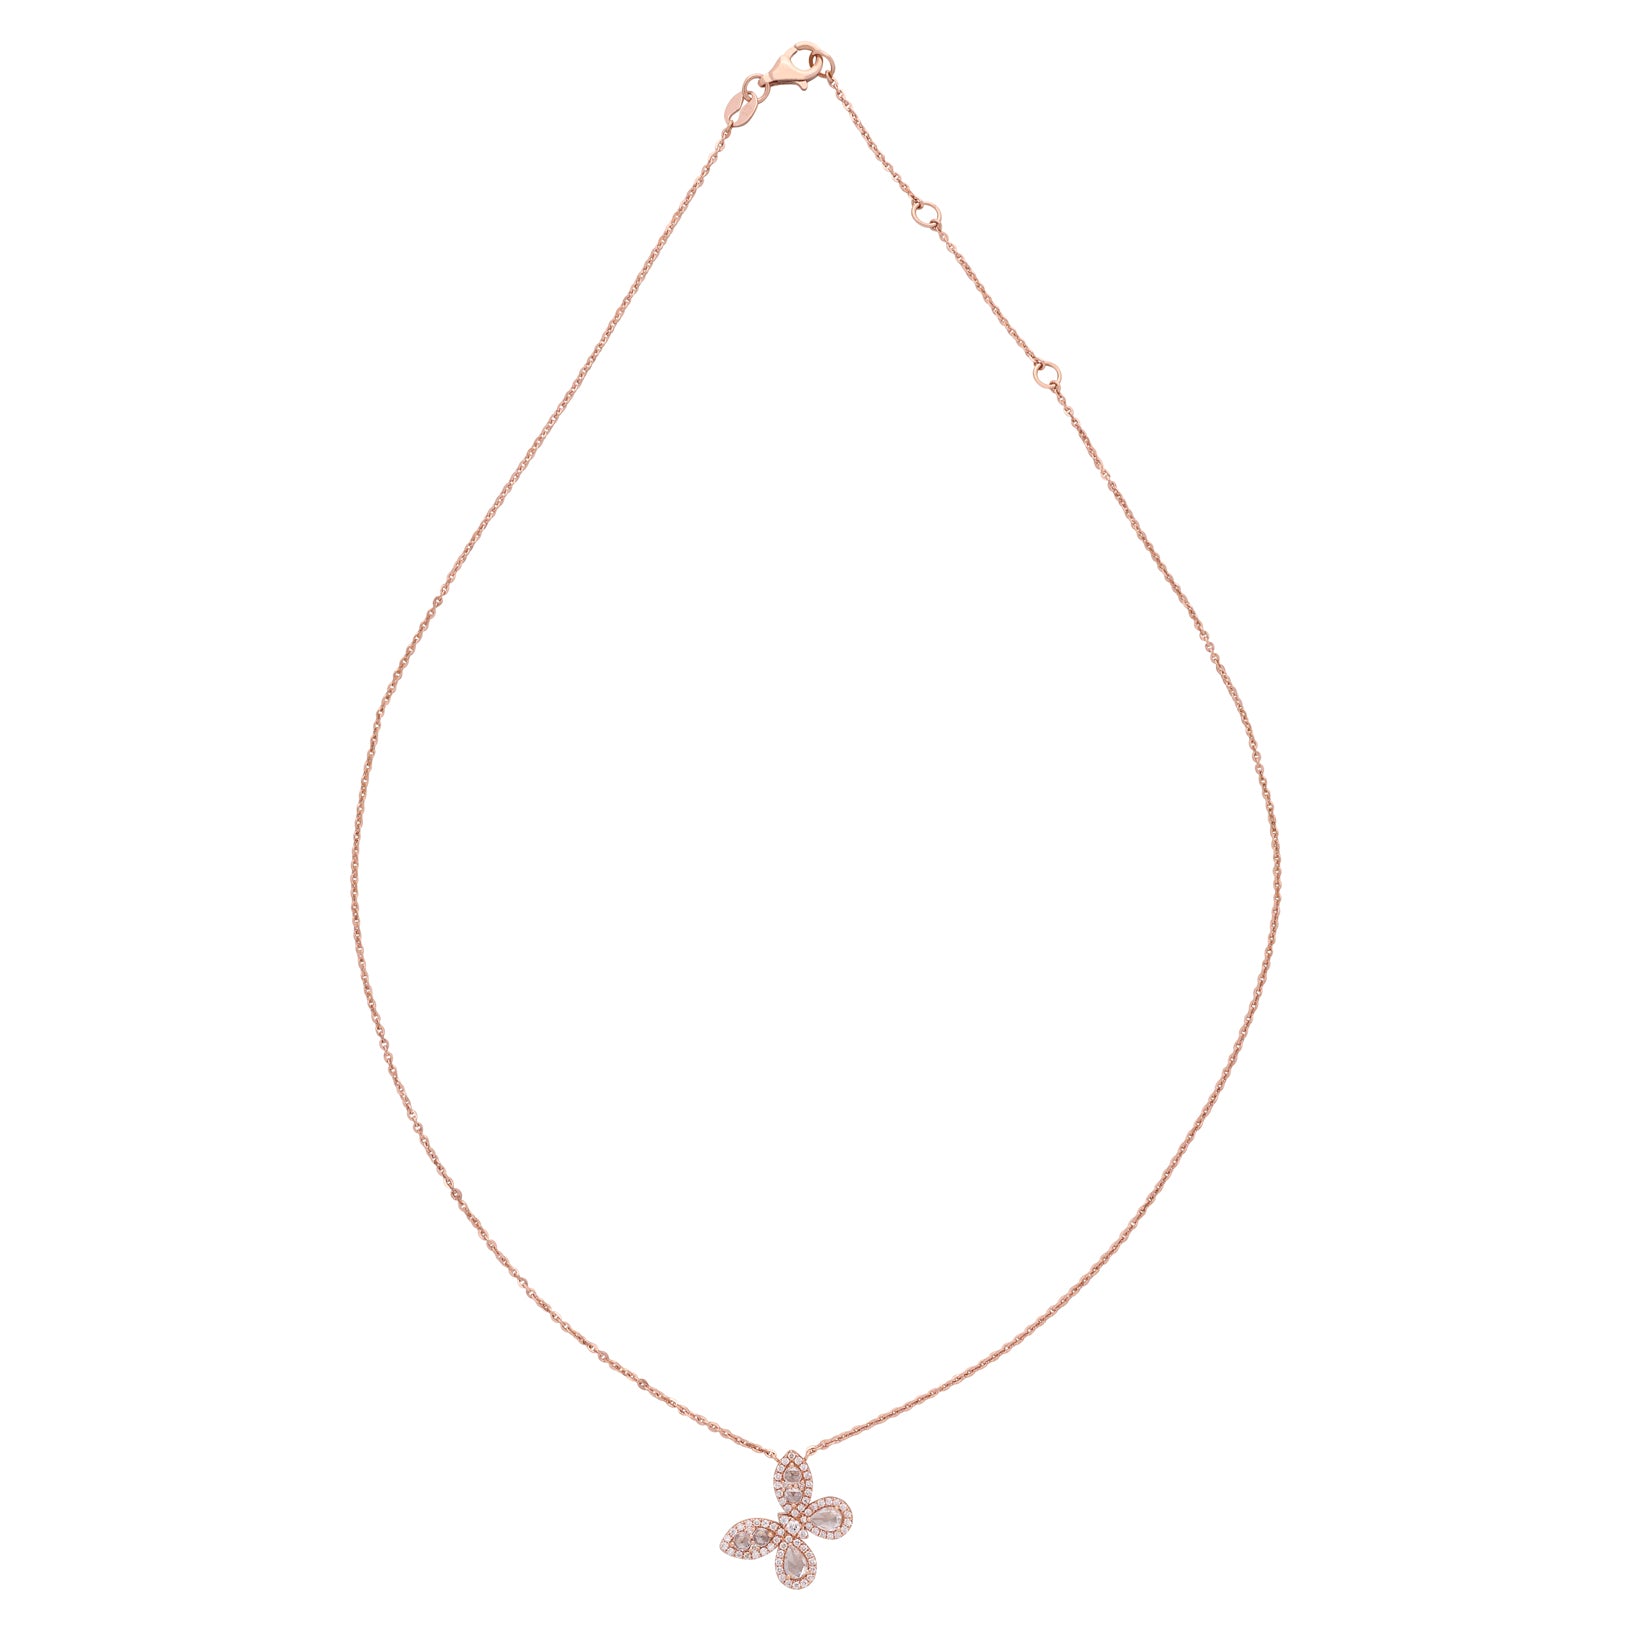 Star Blossom pink gold necklace